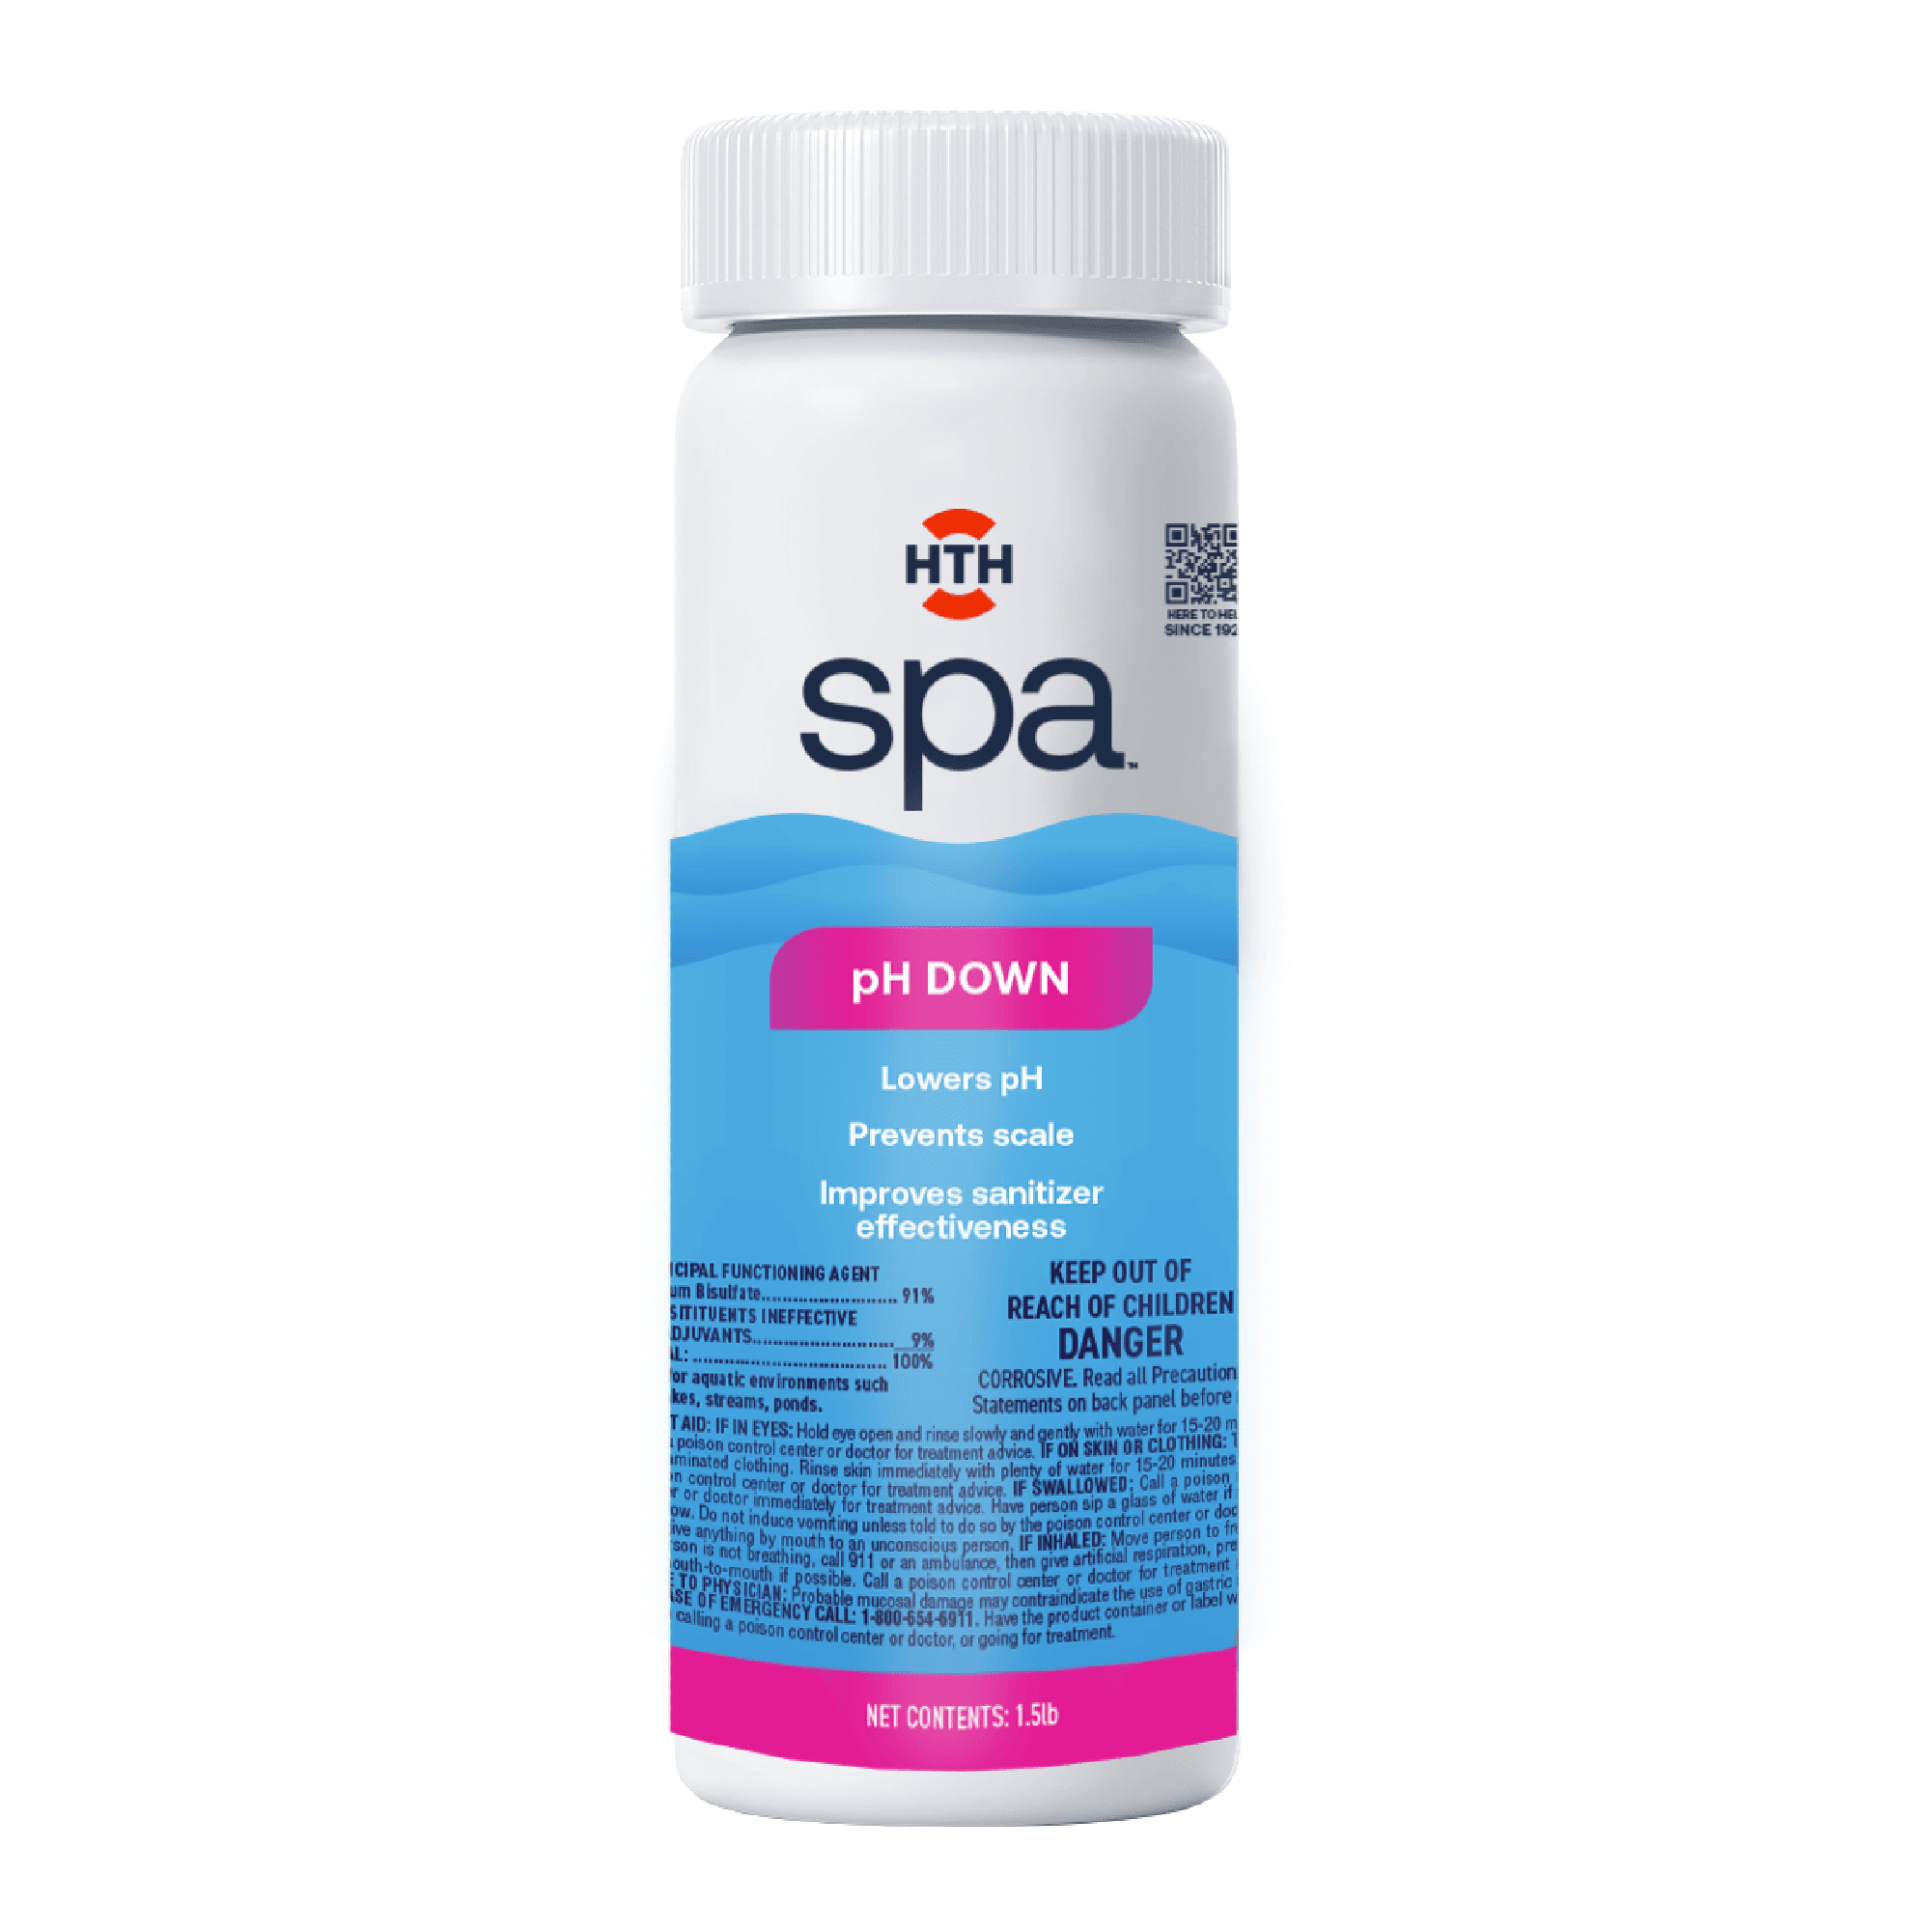 HTH Spa Care pH Down, Lowers pH for Spas & Hot Tubs, 2.5lb